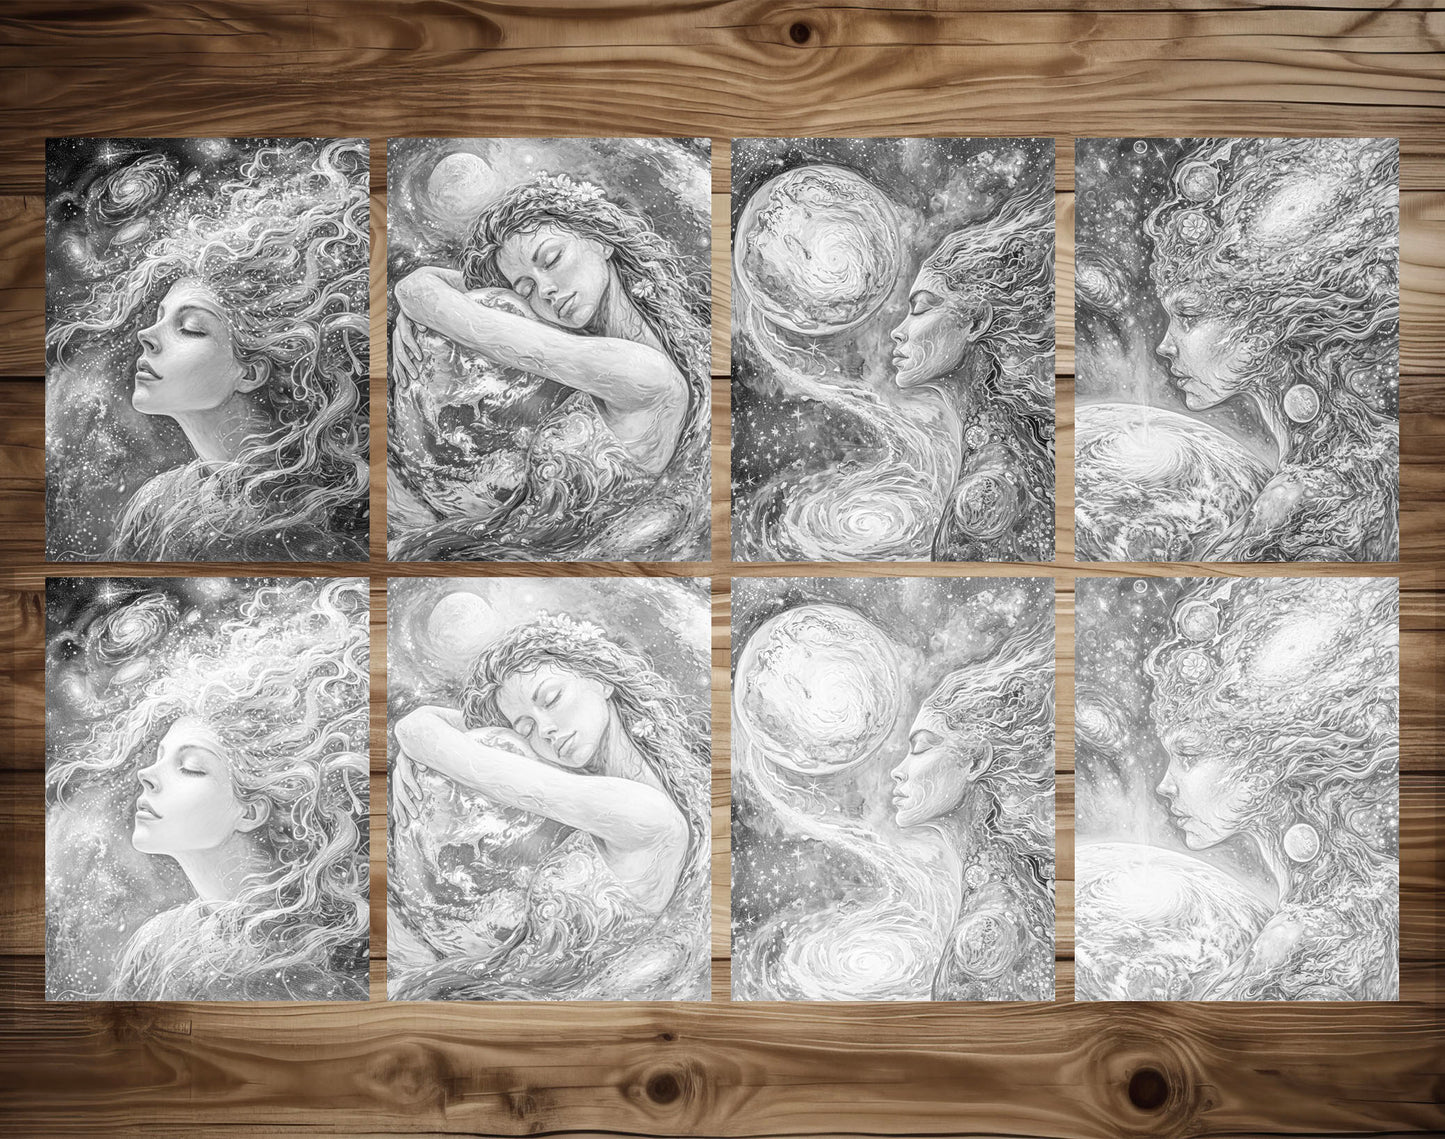 50 Mother Of The Earth Grayscale Coloring Pages - Instant Download - Printable Dark/Light